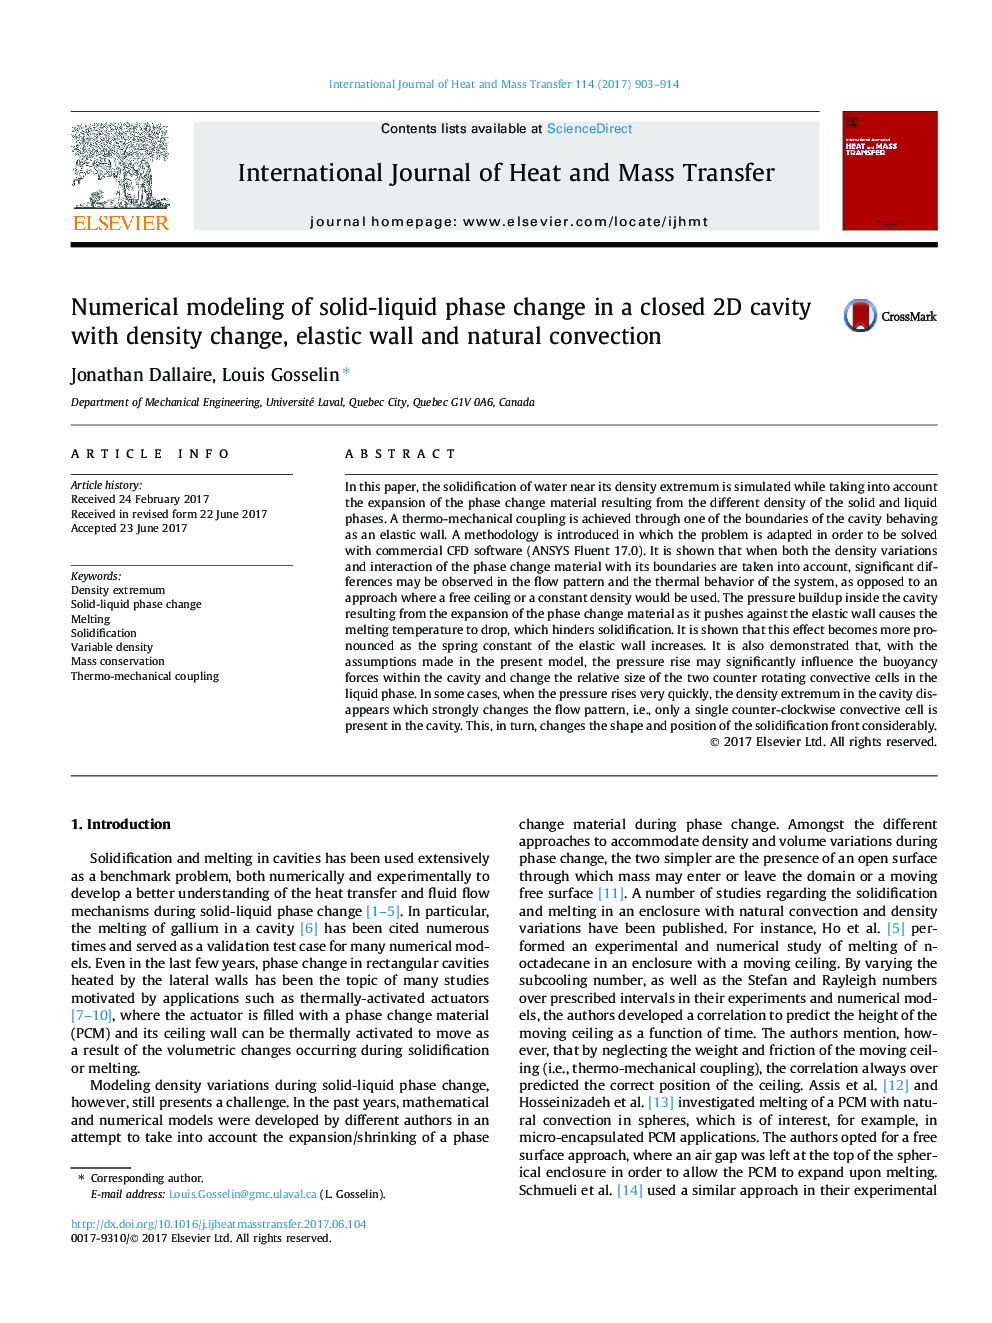 Numerical modeling of solid-liquid phase change in a closed 2D cavity with density change, elastic wall and natural convection